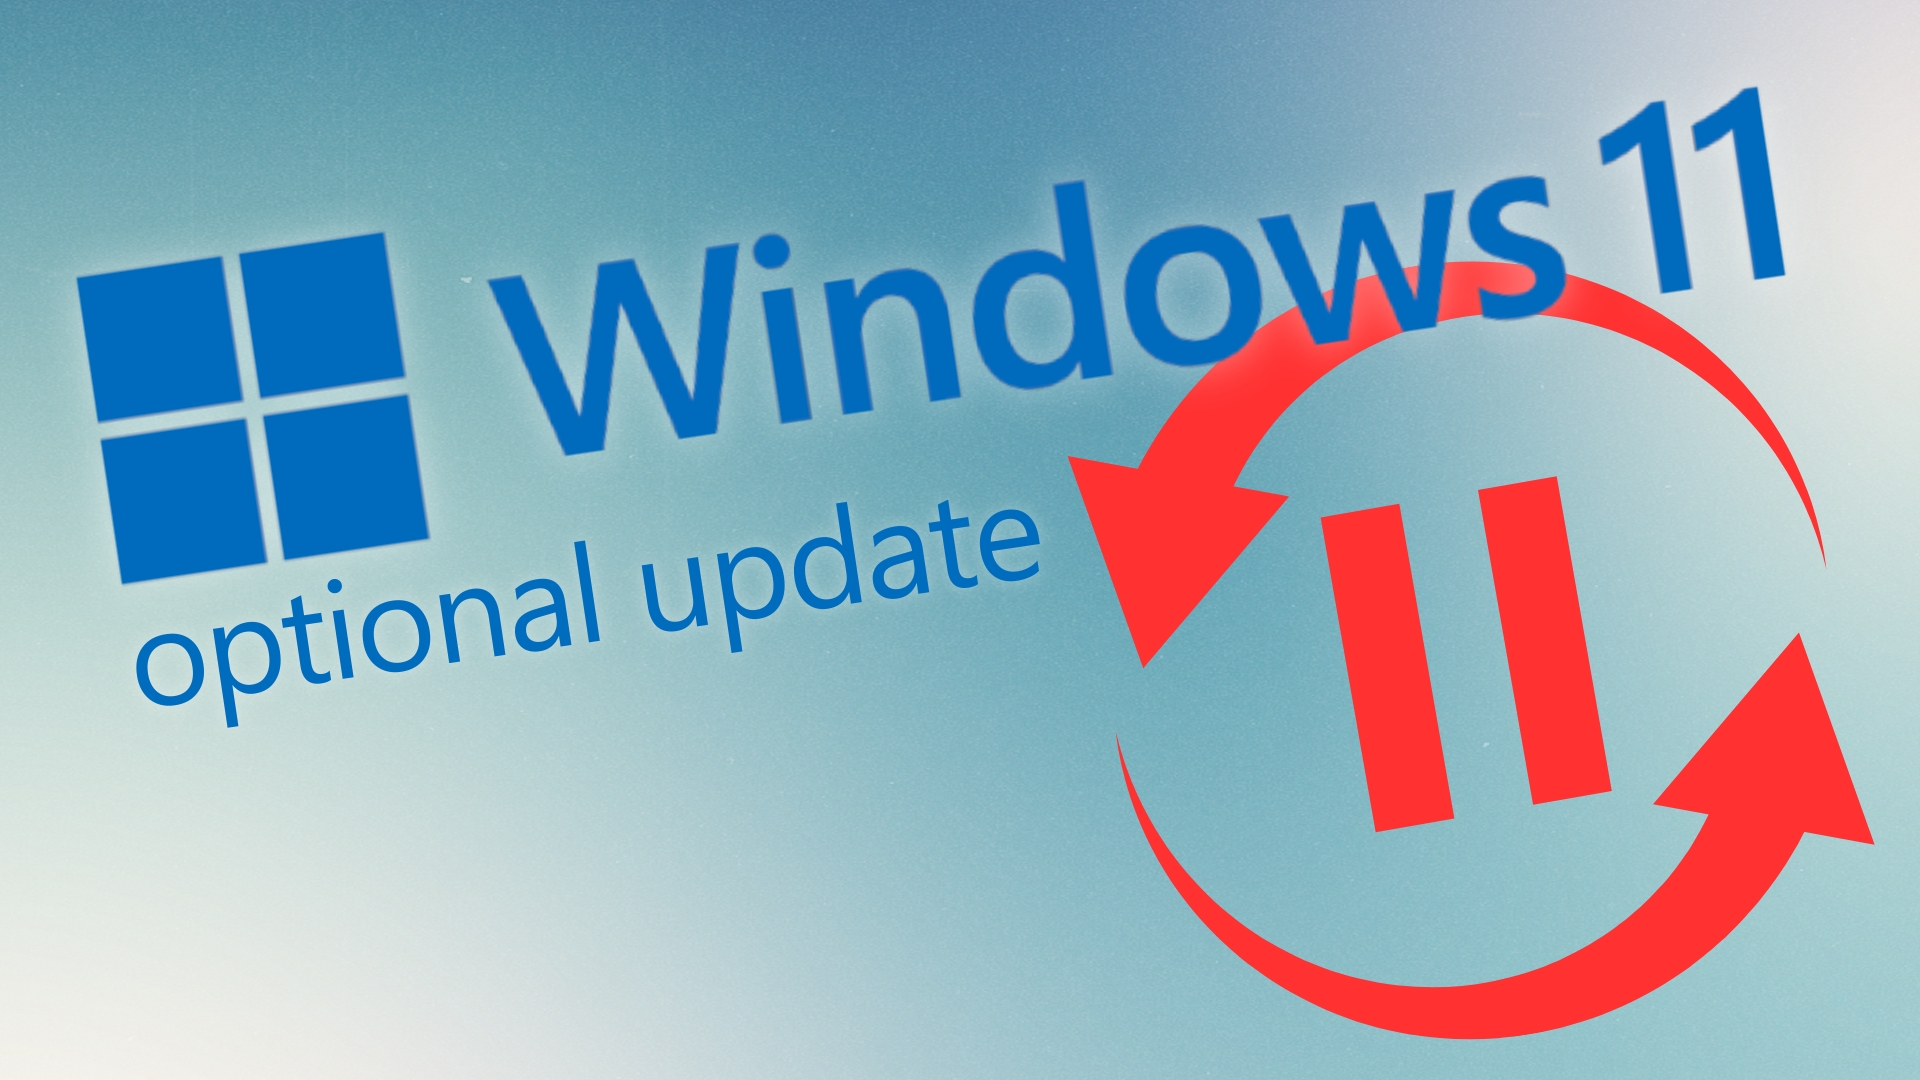 Windows 11 Updates: Ride the wave or temper the storm?